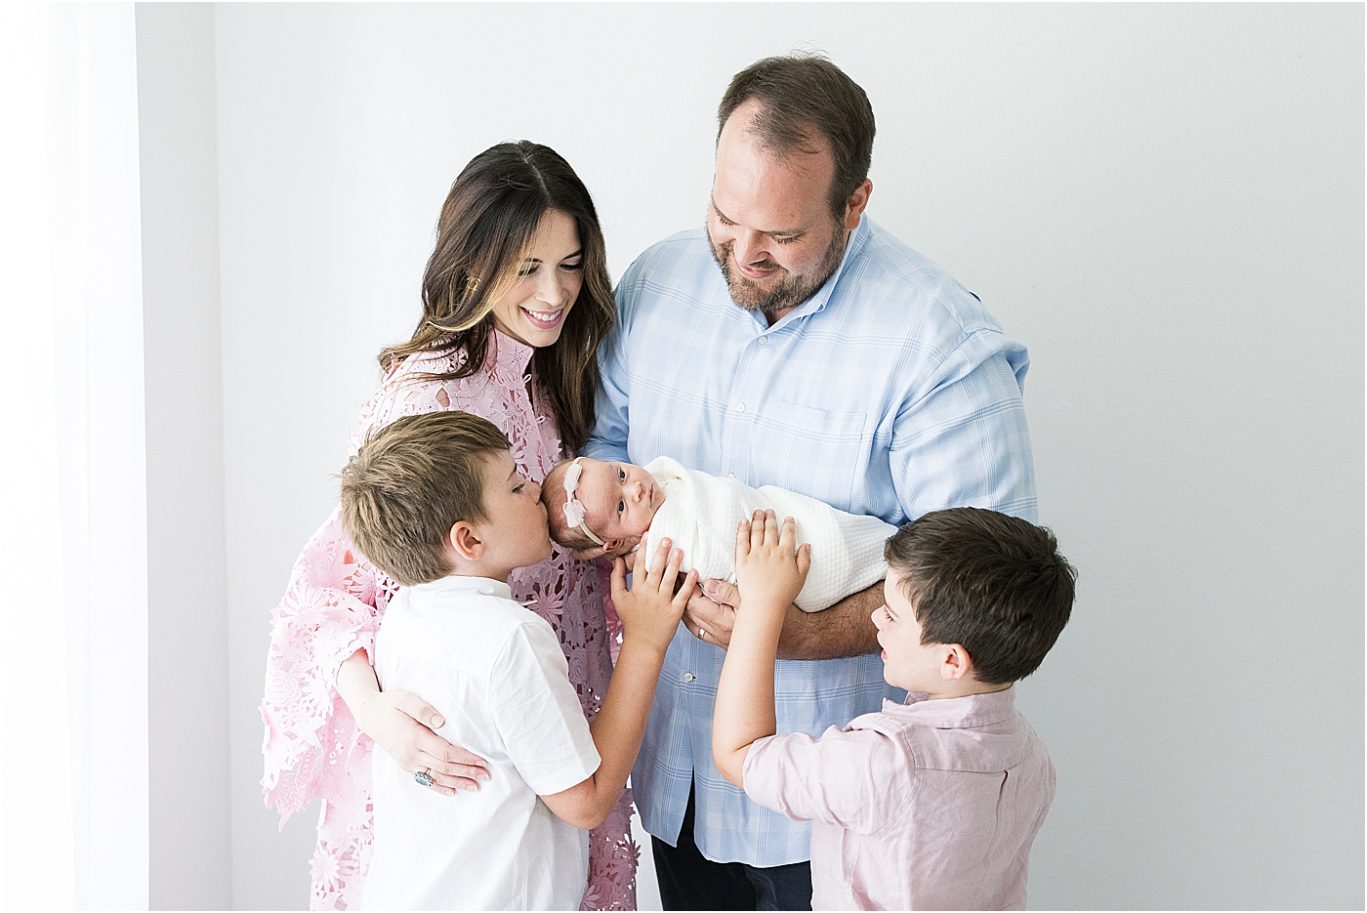 Family portrait in studio during newborn session with Lindsay Konopa Photography.